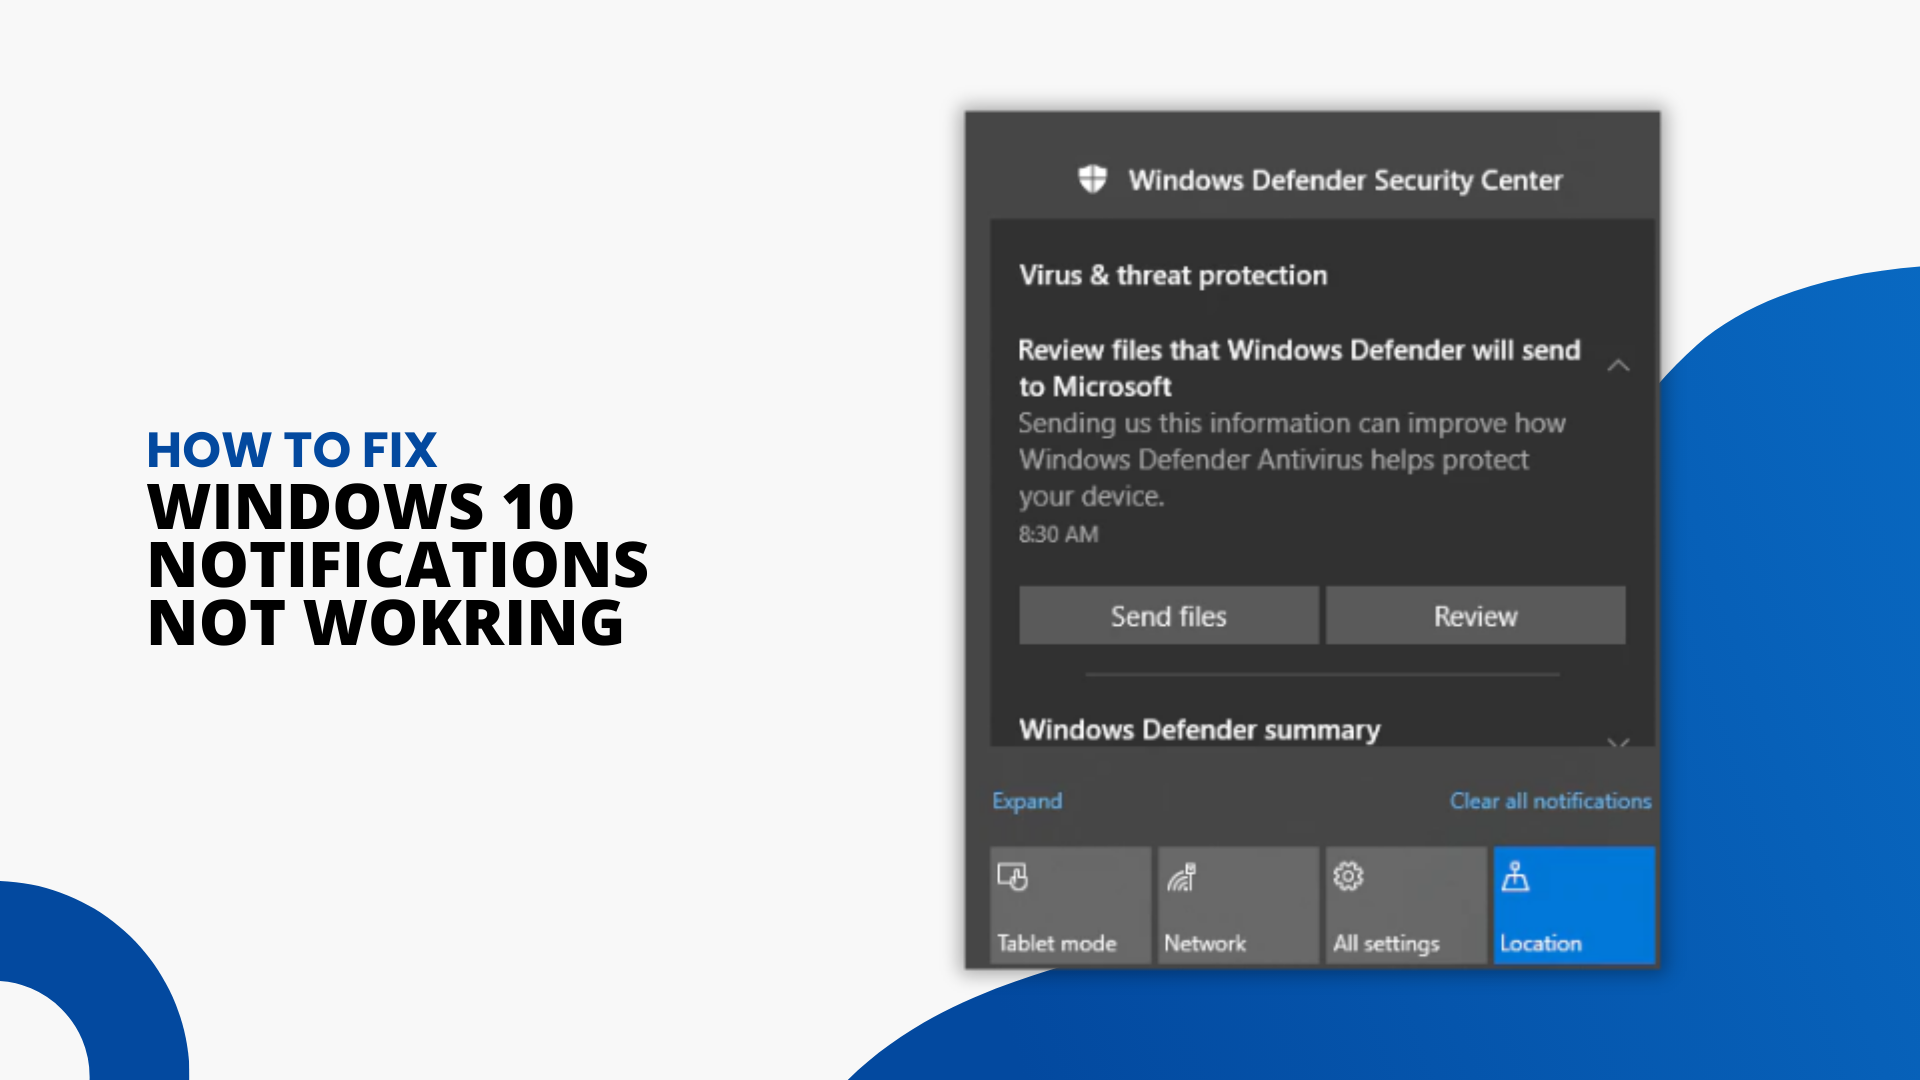 How to Fix Windows 10 Notifications Not Working